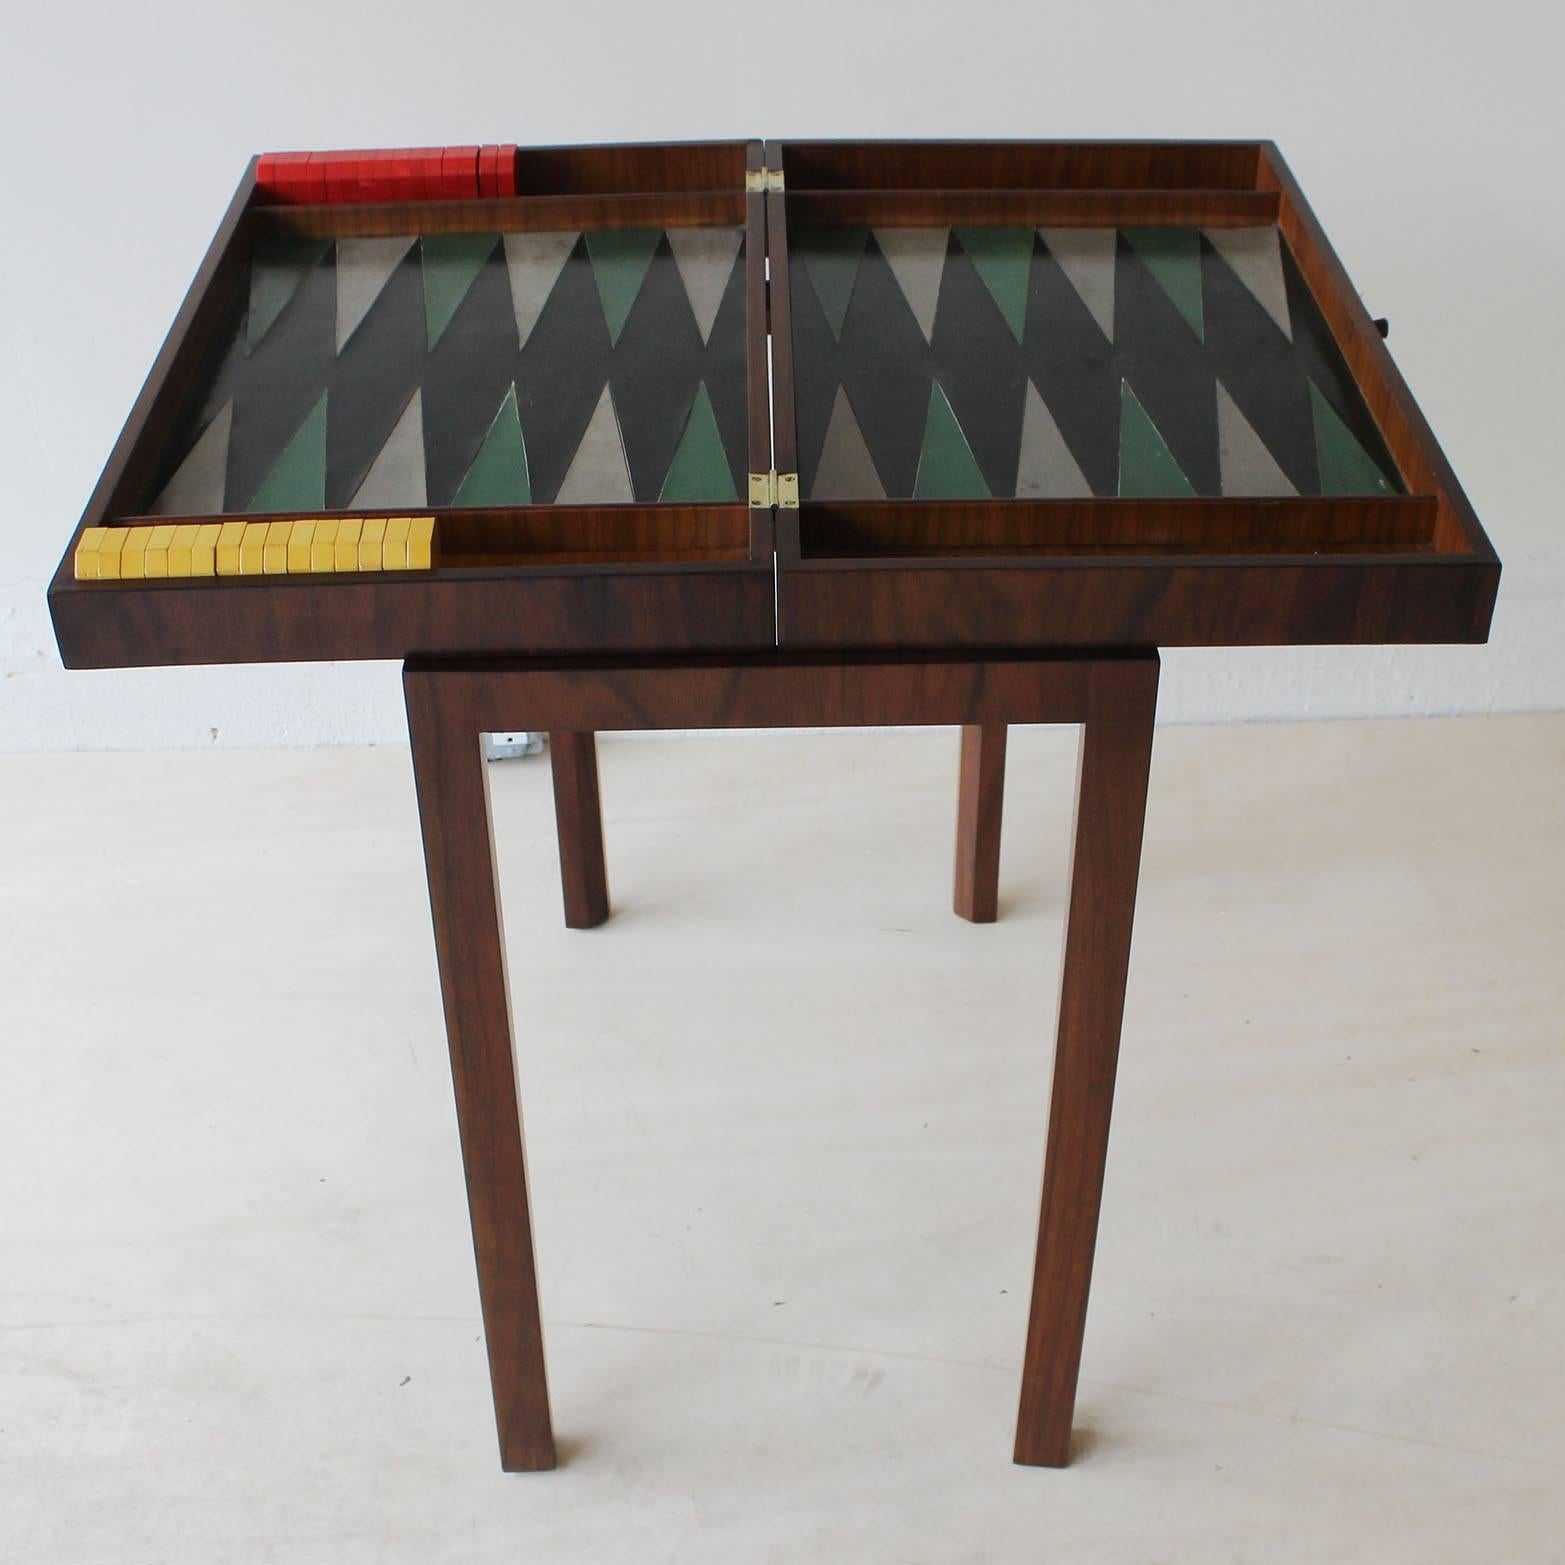 A Tommi Parzinger custom-made folding backgammon table with leather top and bakelite gaming pieces. Acquired directly from Parzinger's estate by previous owner who was a neighbor and collector. Lightly restored. Measures: Table opens to 29.5 inches